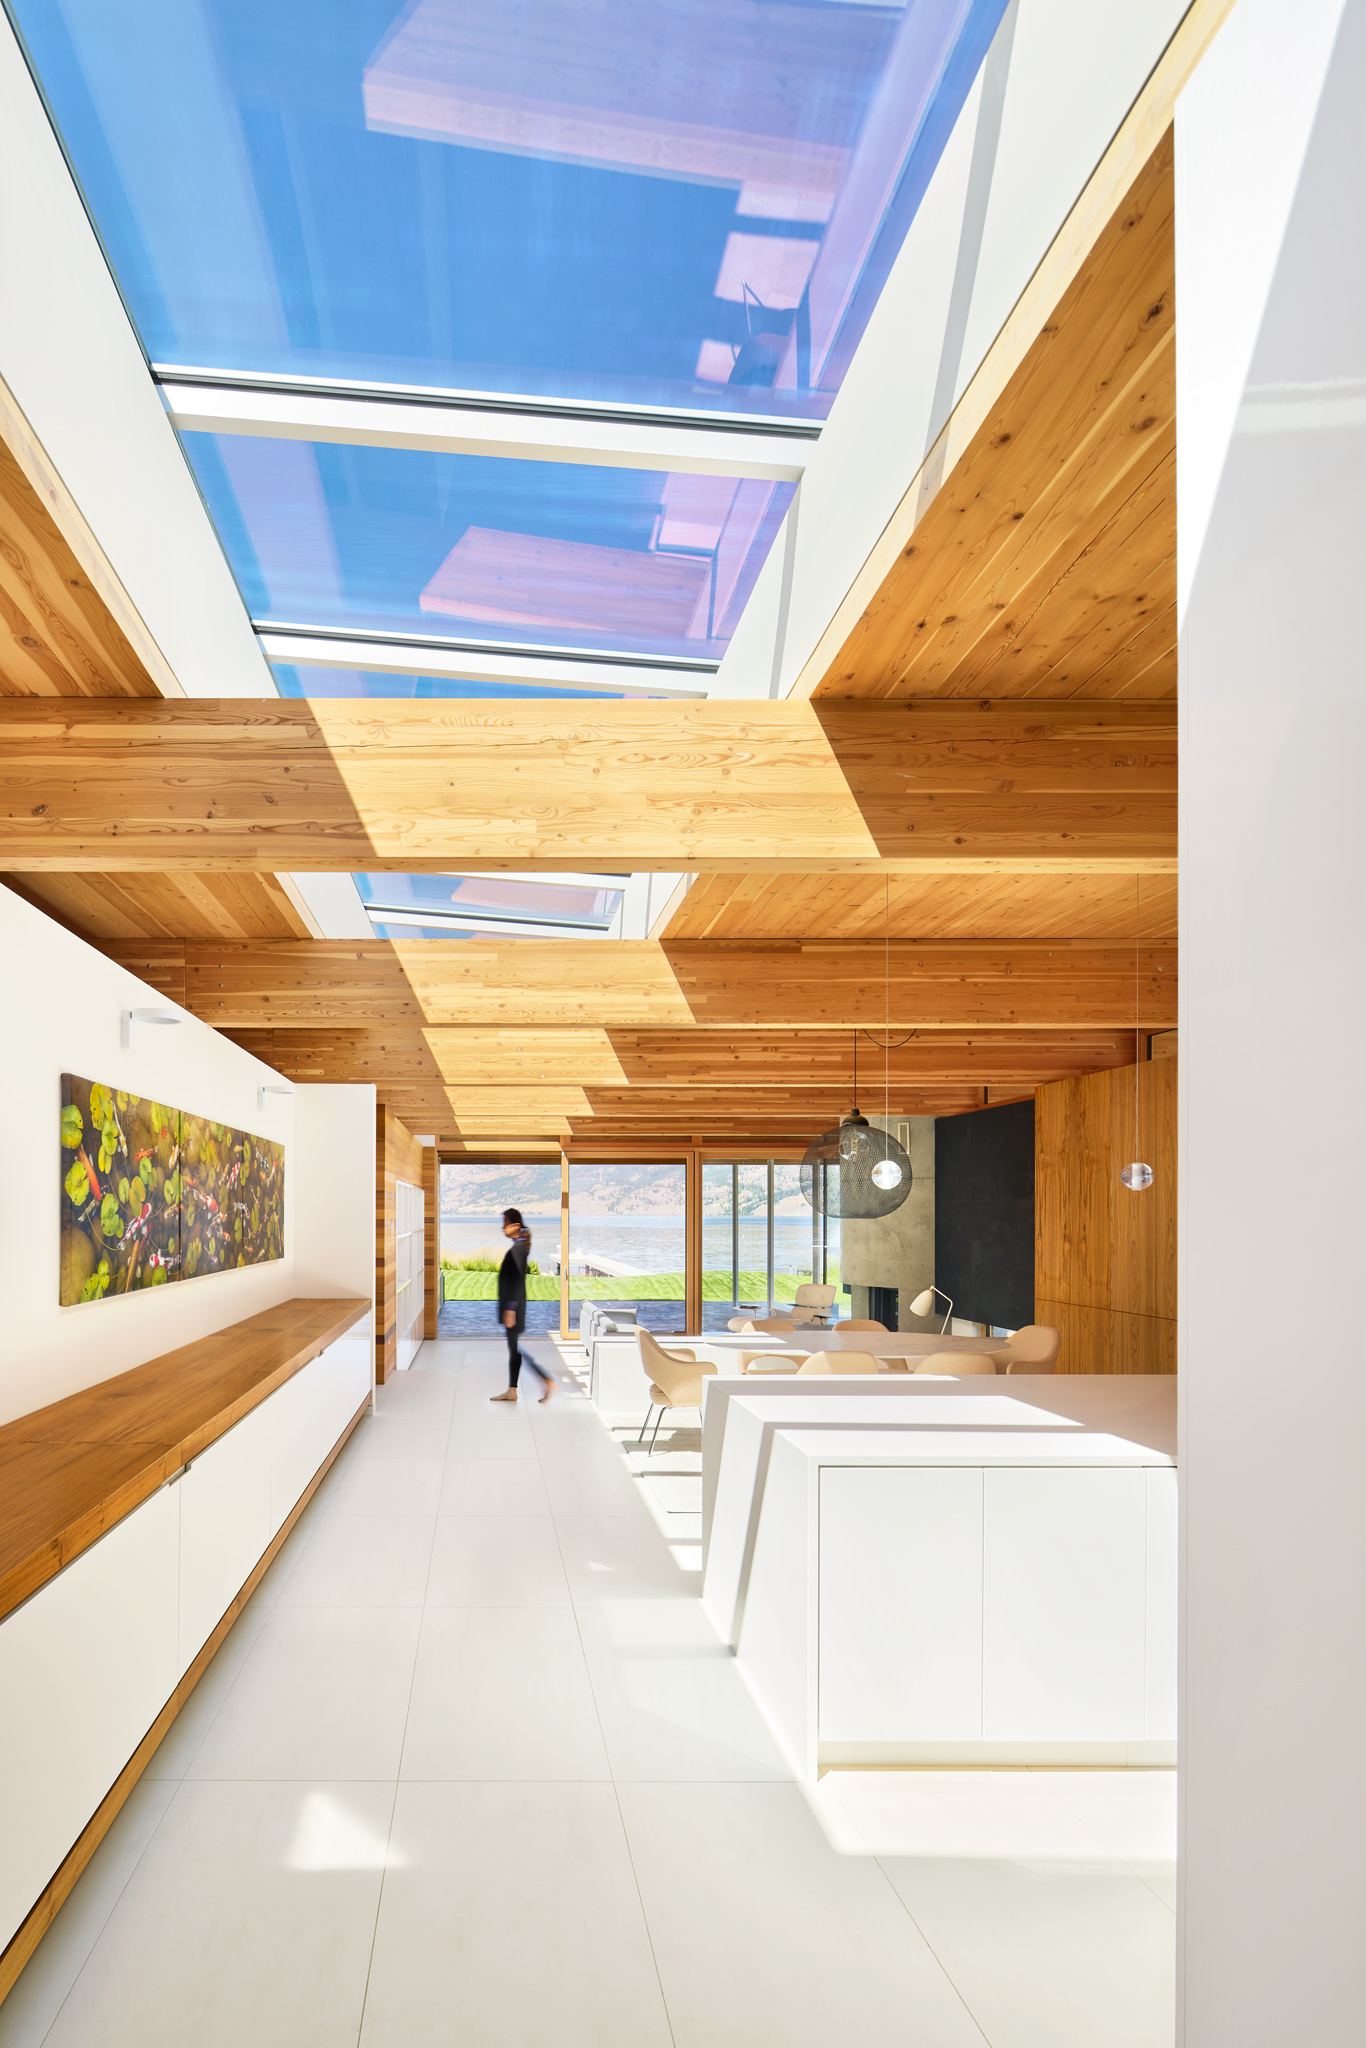 Interior view of modern bright home with blue skylights and view out to lake